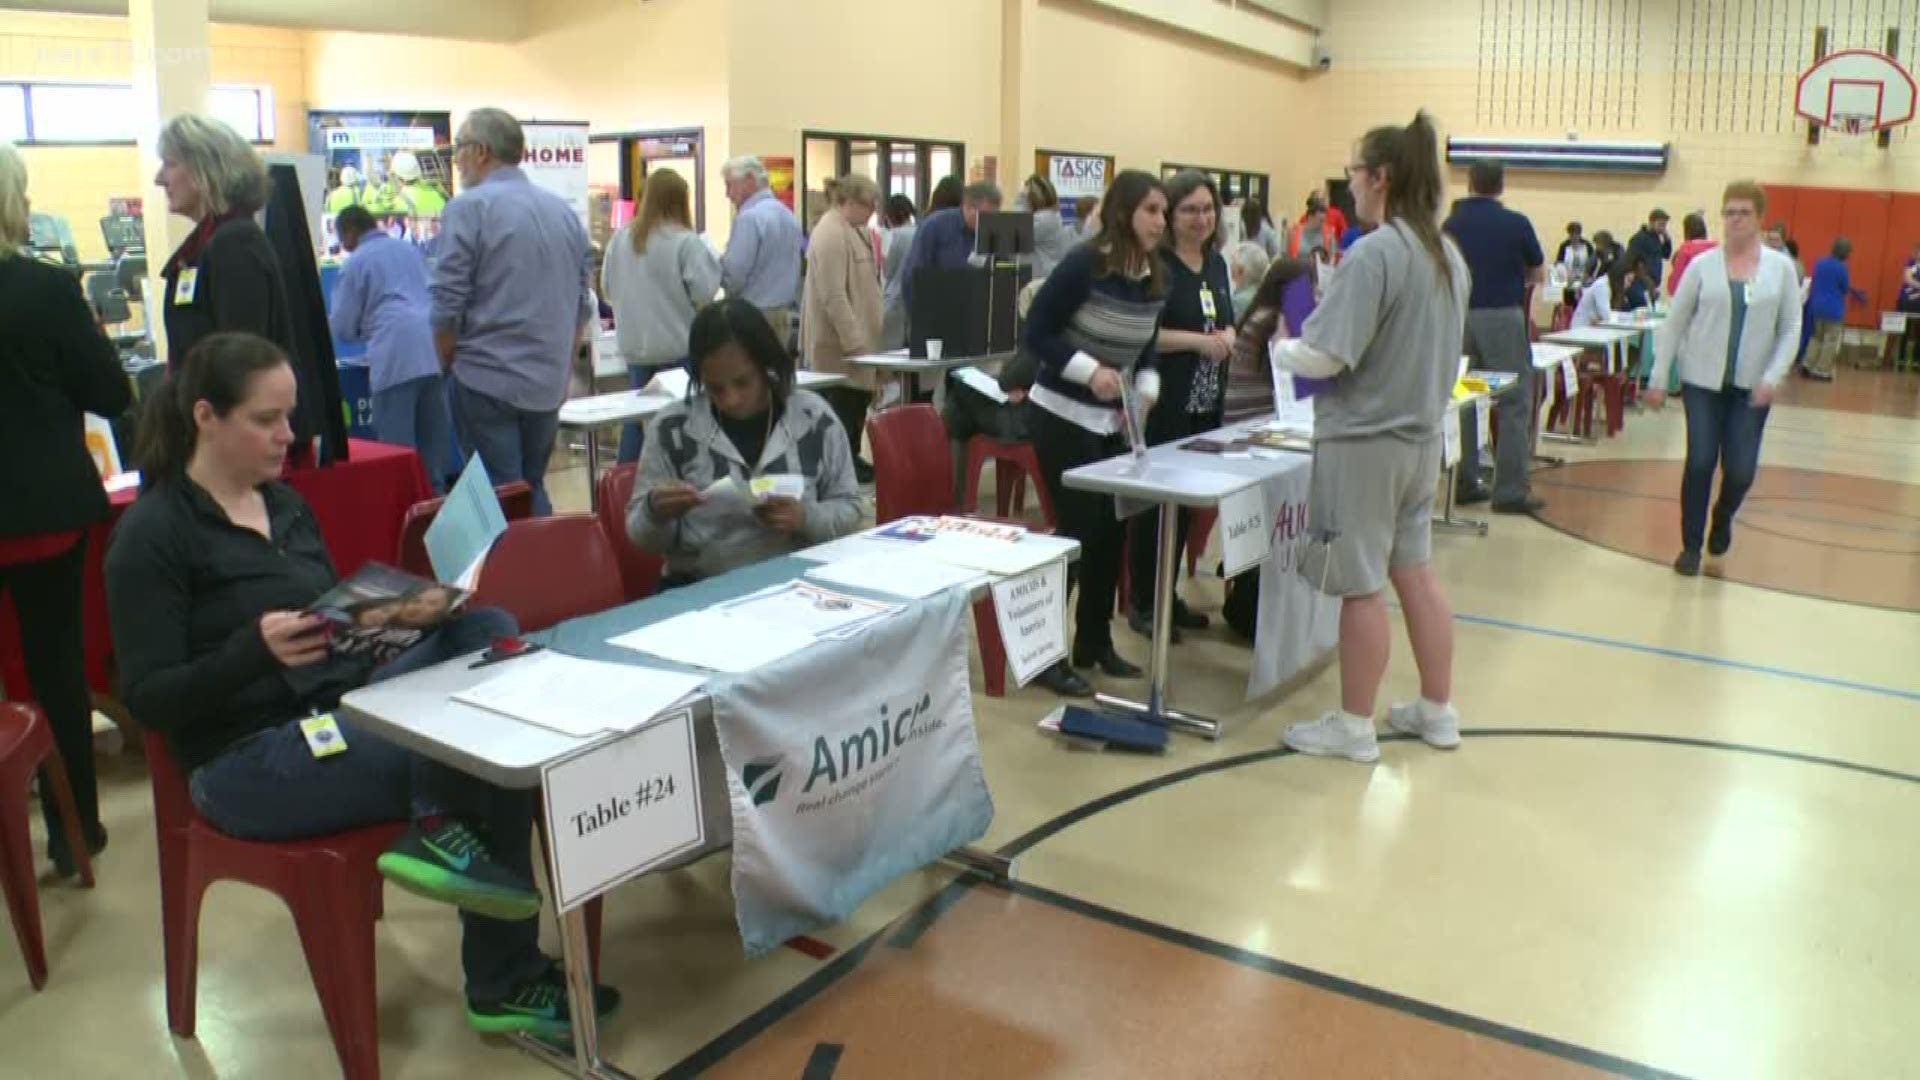 KARE 11's Heidi Wigdahl takes us to the transition fair at the Correctional Facility in Shakopee.